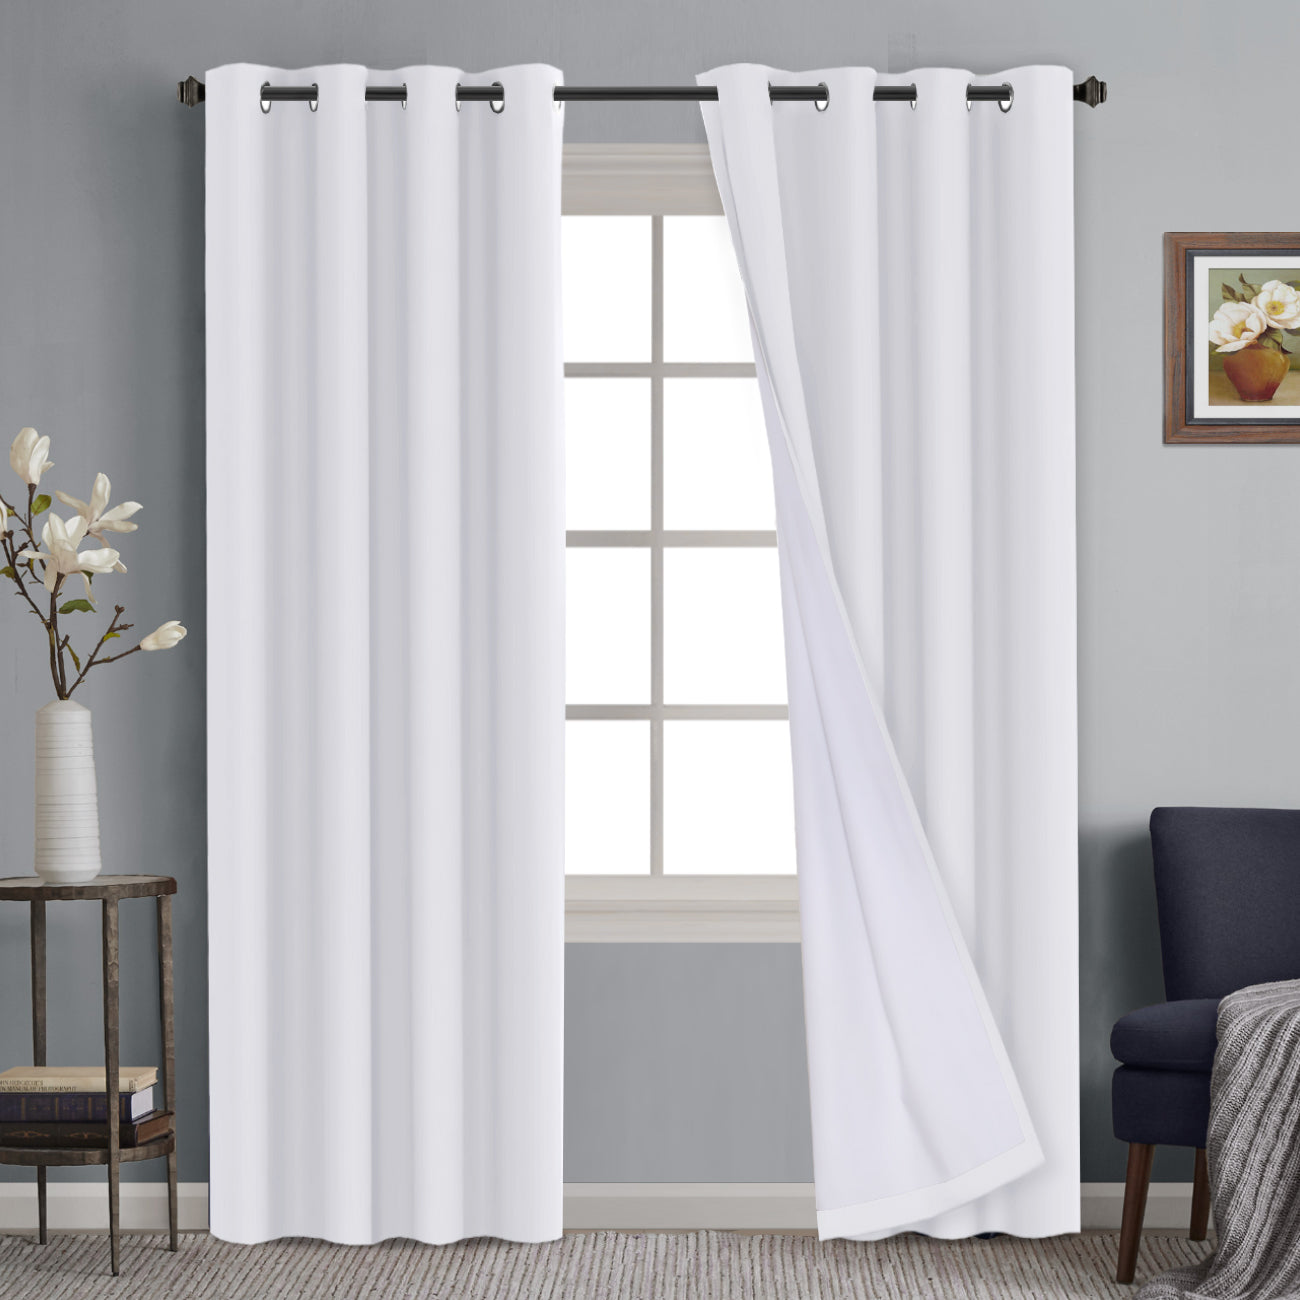 100% Blackout Curtains Full Light Blocking Curtain Draperies for Bedroom/Living Room 52'' x 84''